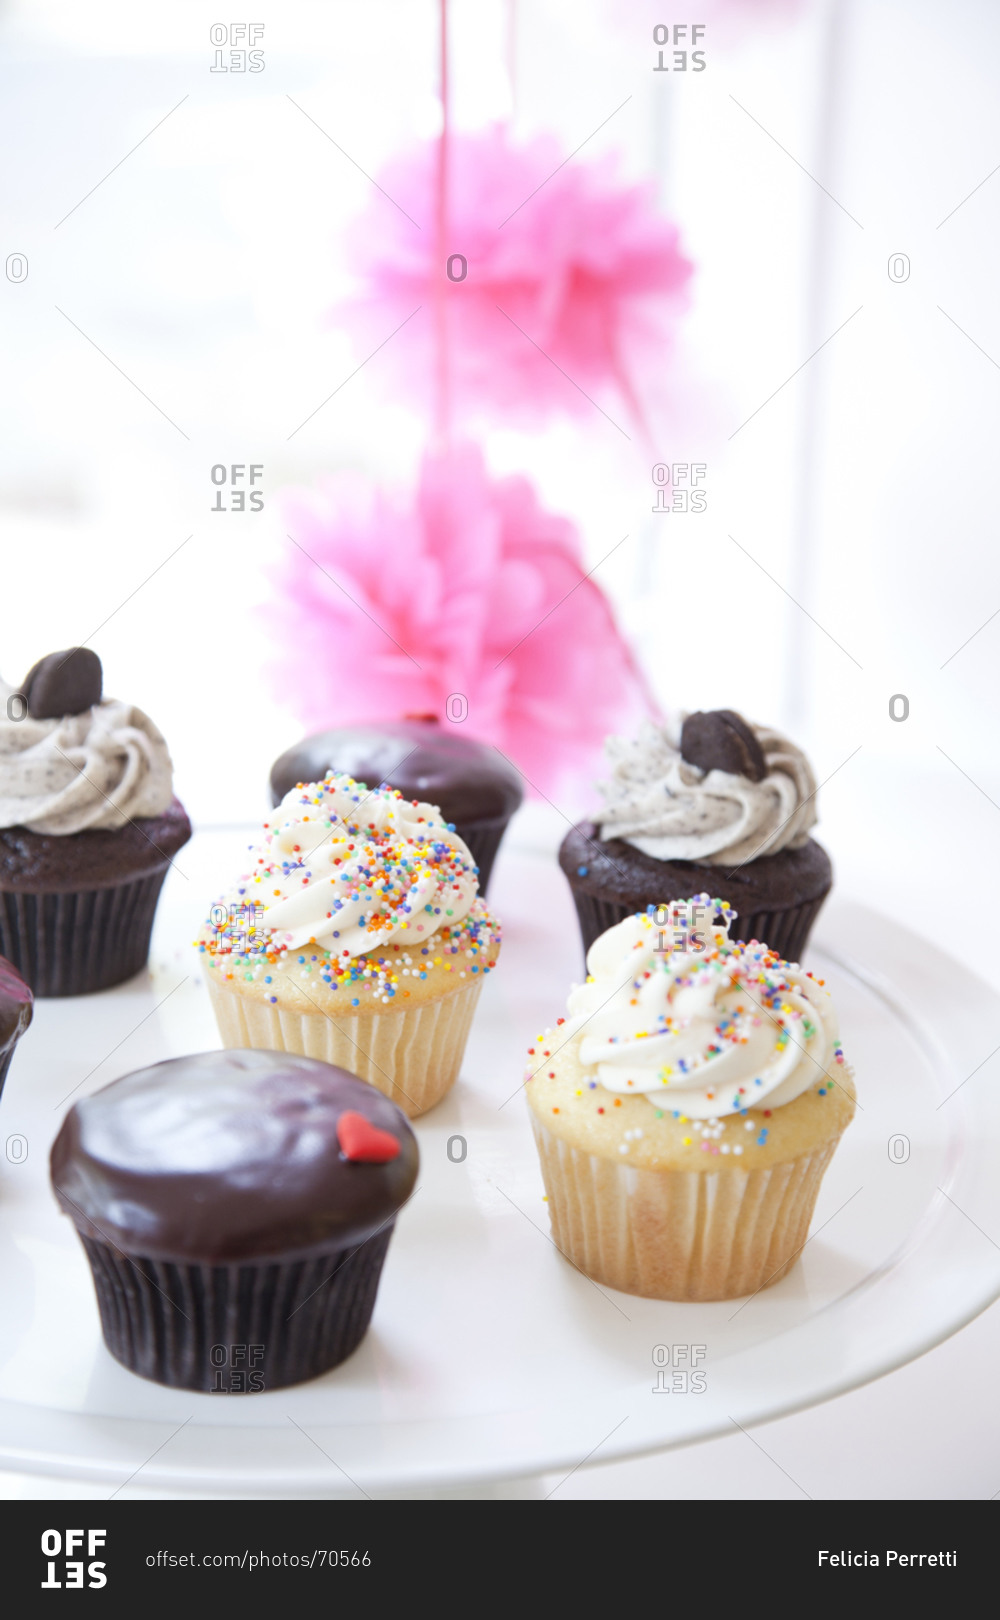 Still life of three different cupcakes on cake stand